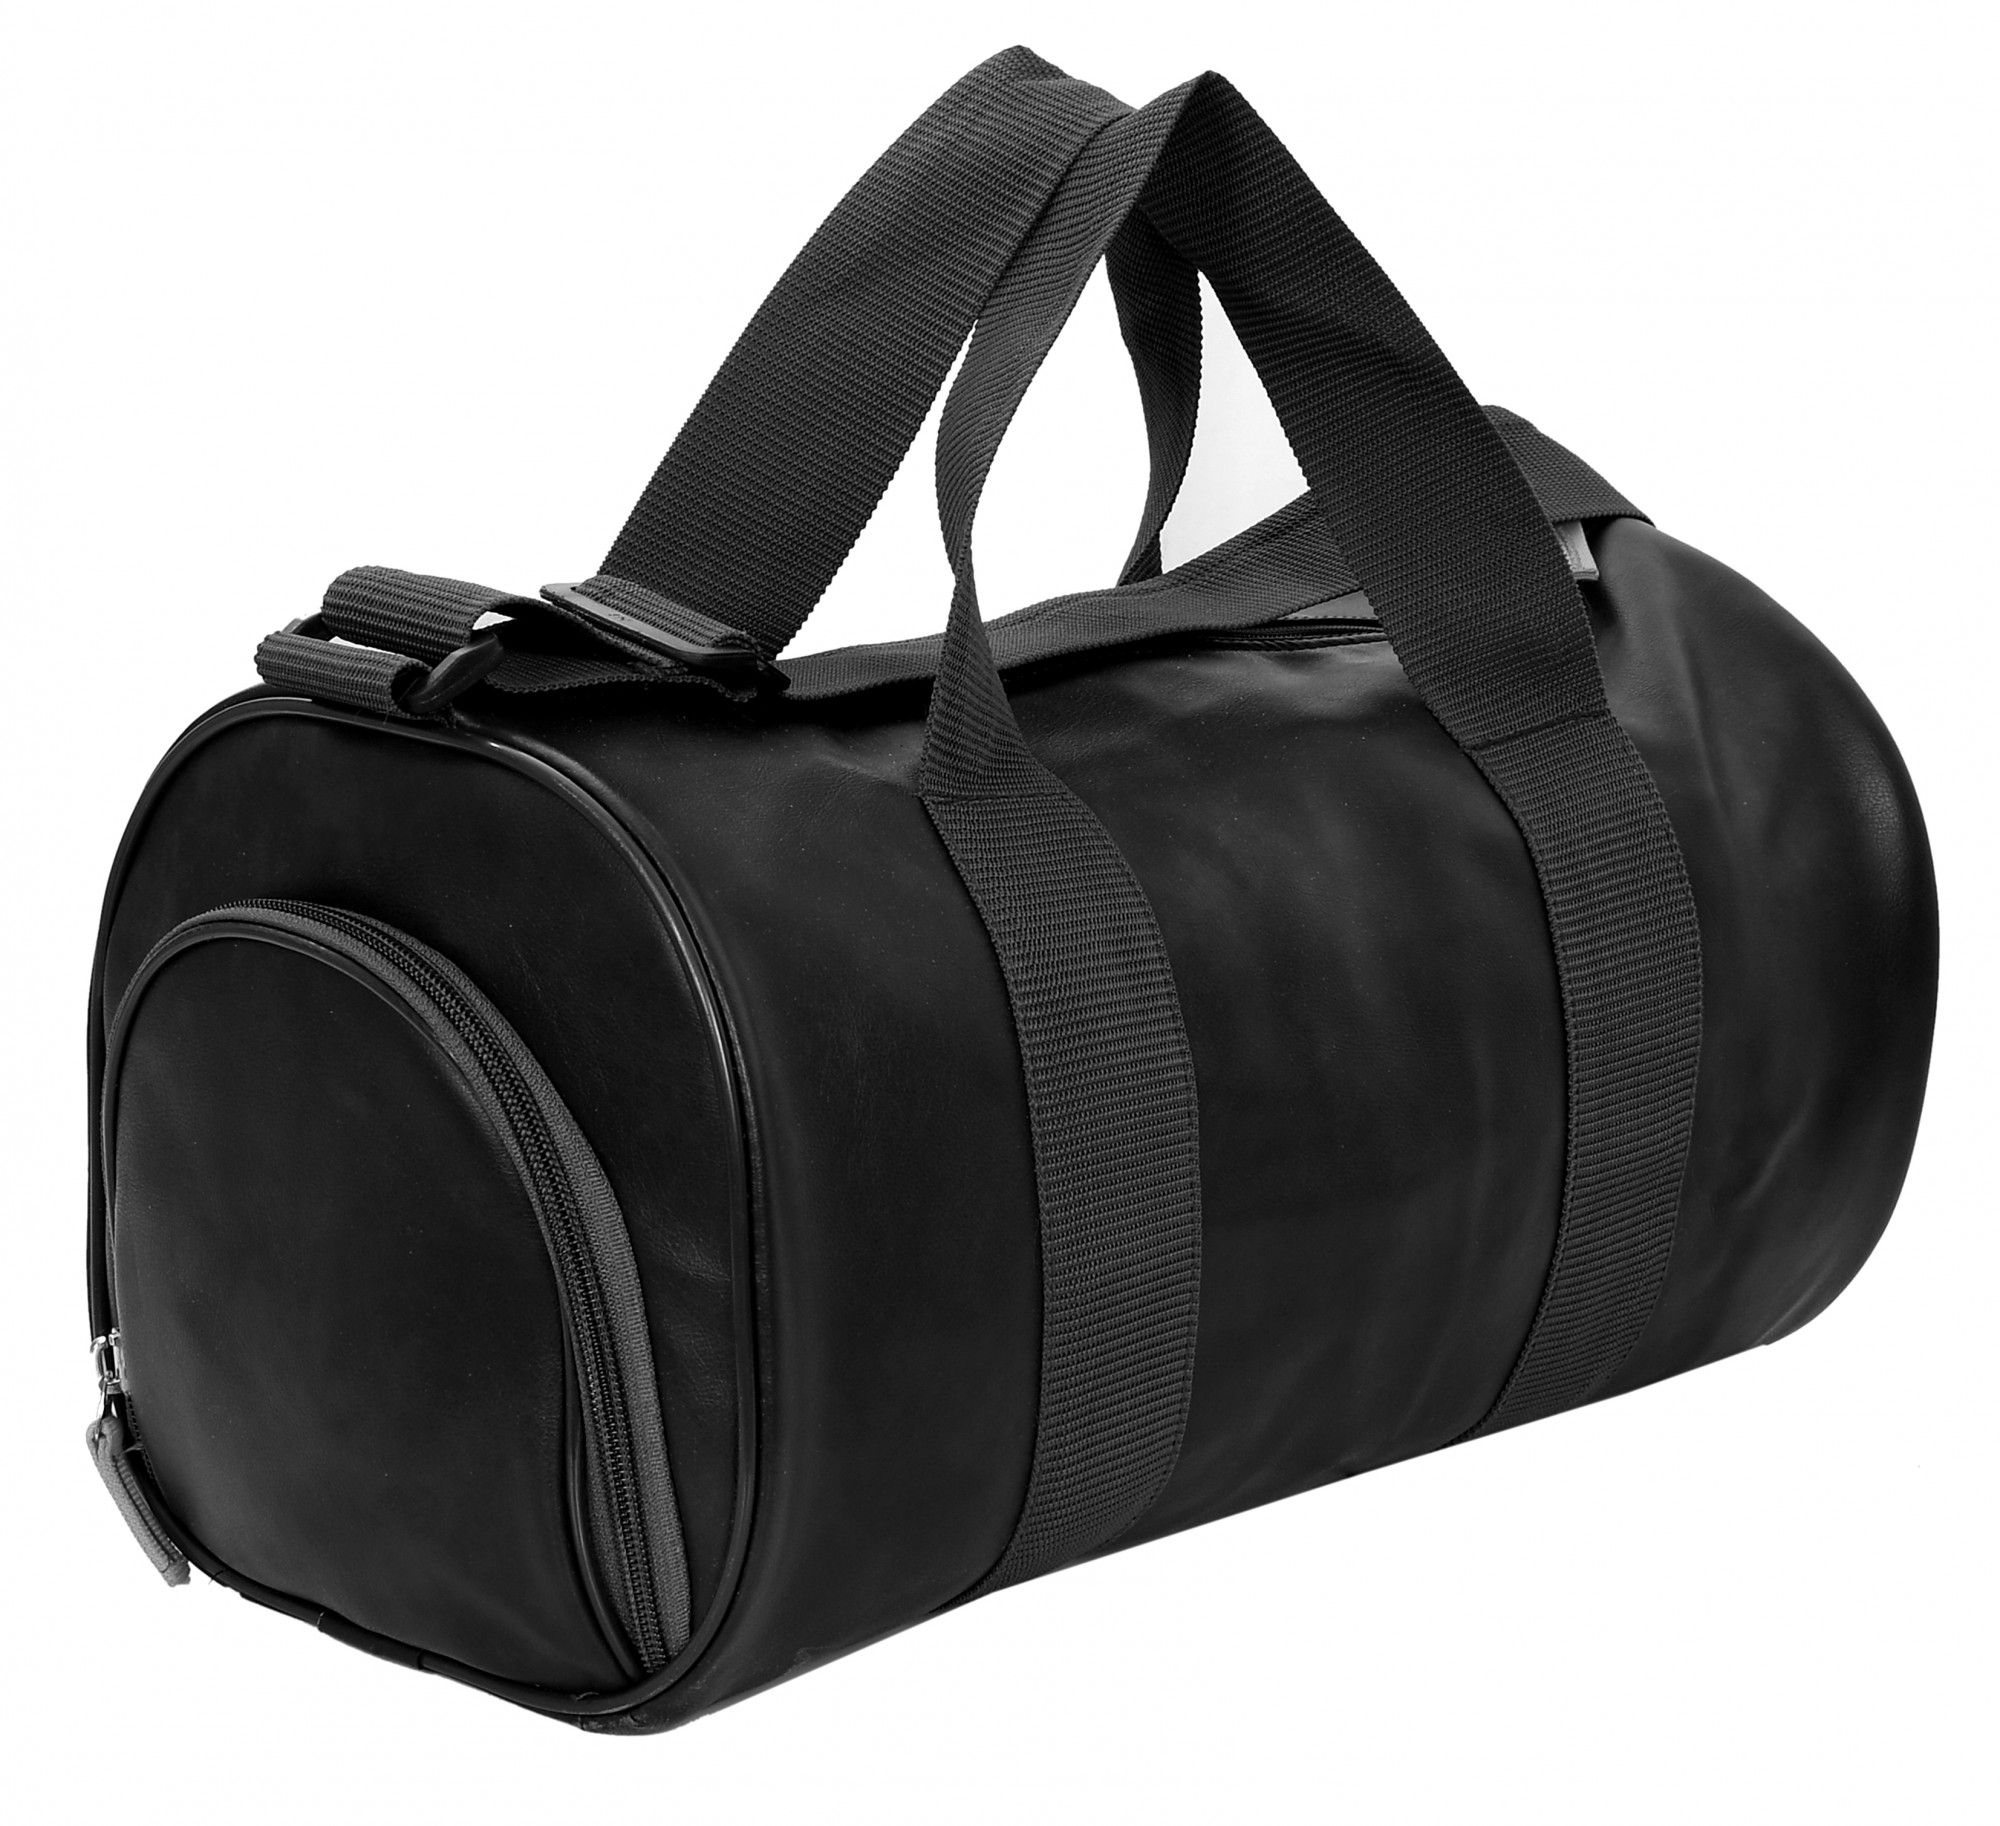 Kuber Industries Sports Gym Bag & Shoes Compartment, Travel Duffel Bag for Men and Women Lightweight (Black)